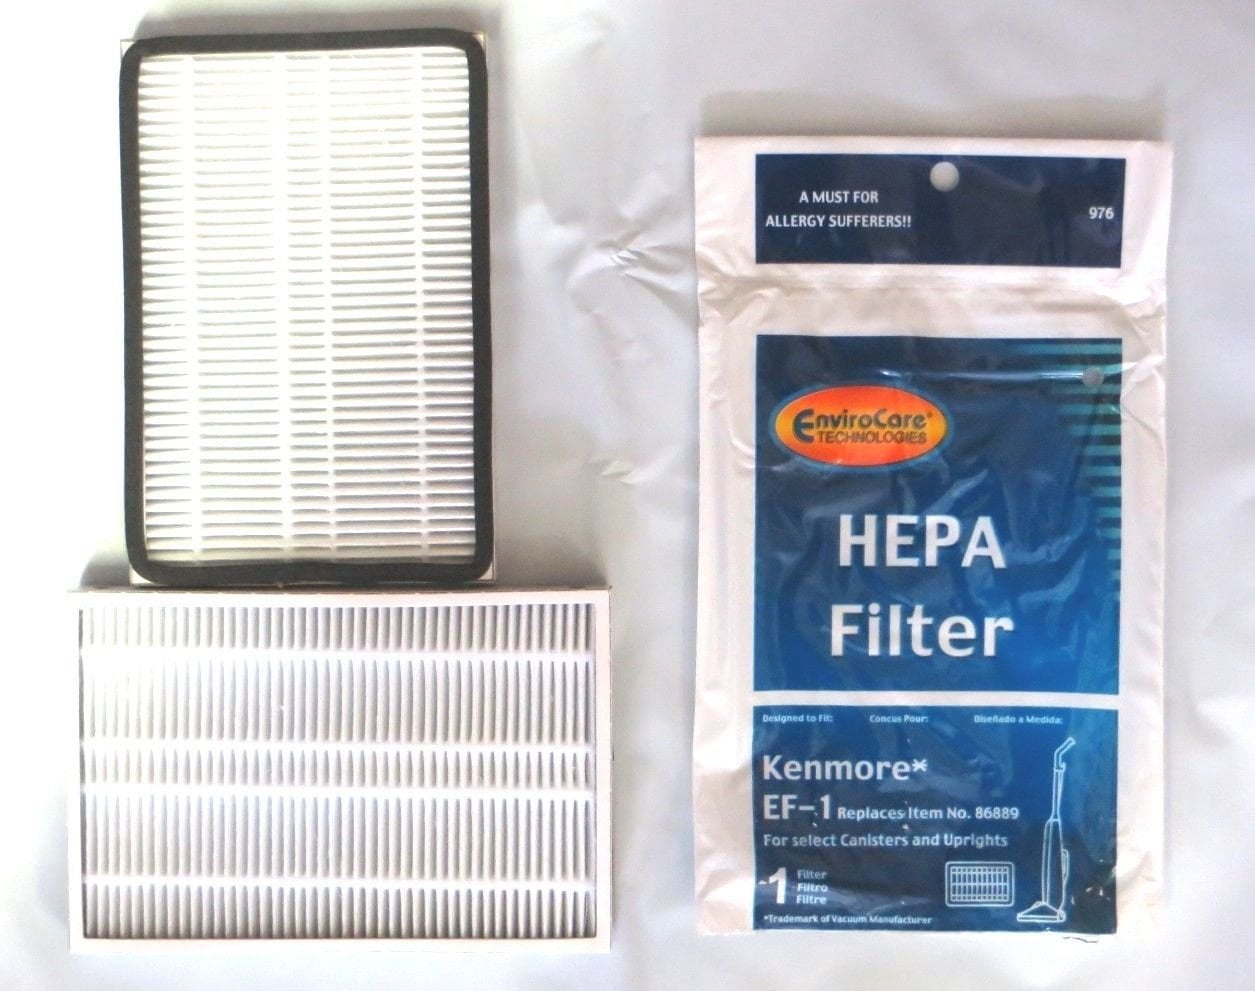 Details about   HEPA Filter for Sears Kenmore EF-1 Vacuum Cleaner Compare to 20-53295 20-86889 